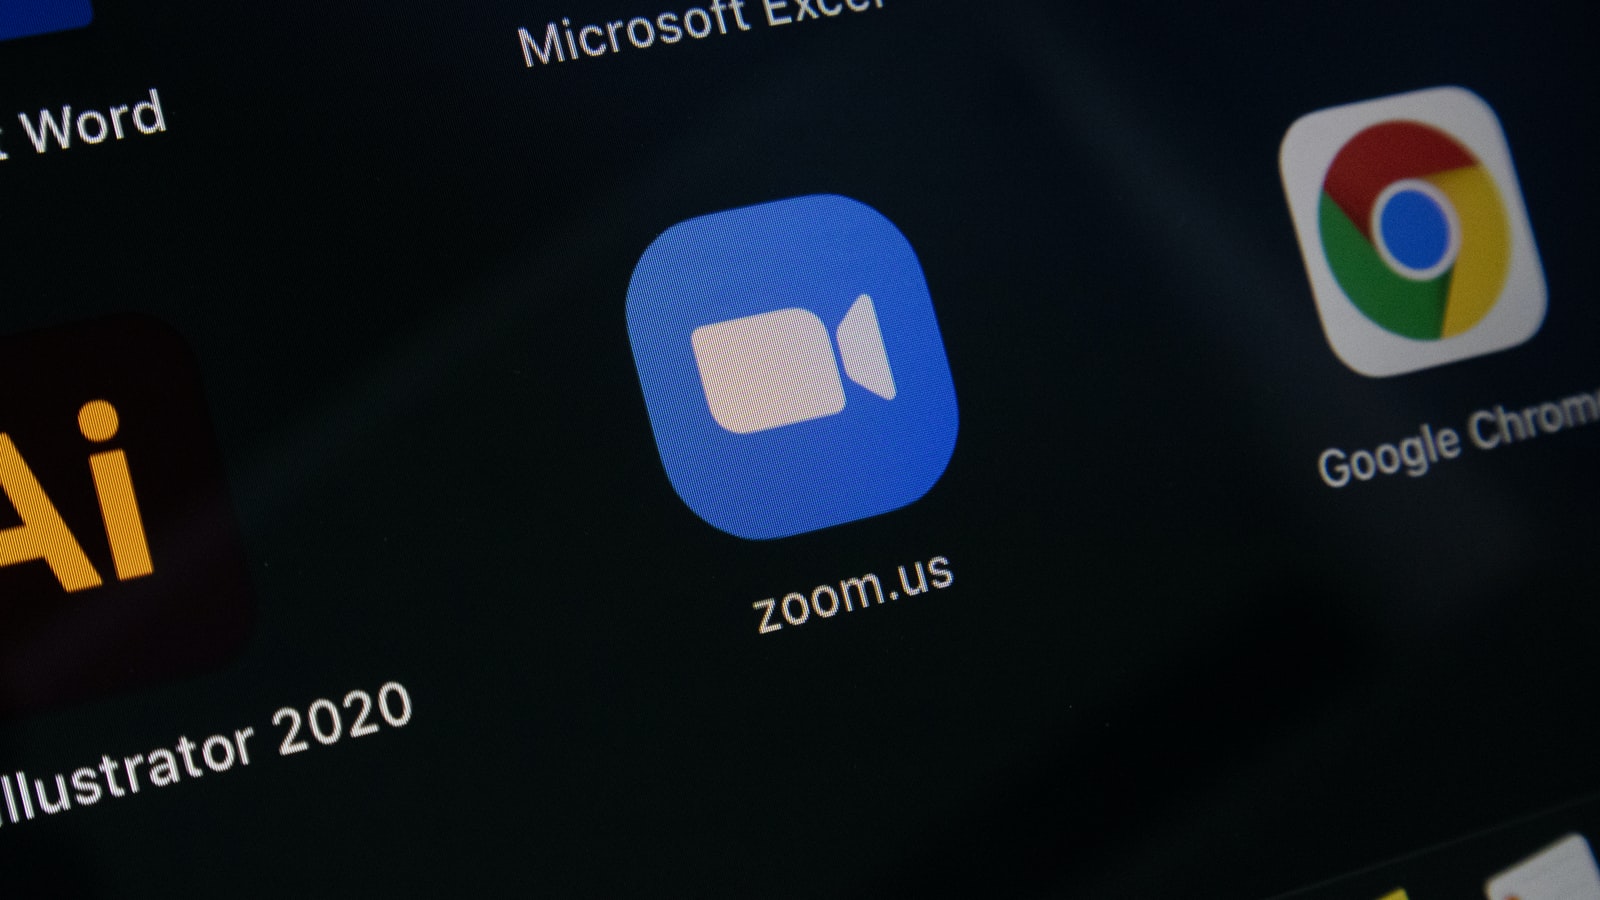 How to use Zoom on Android